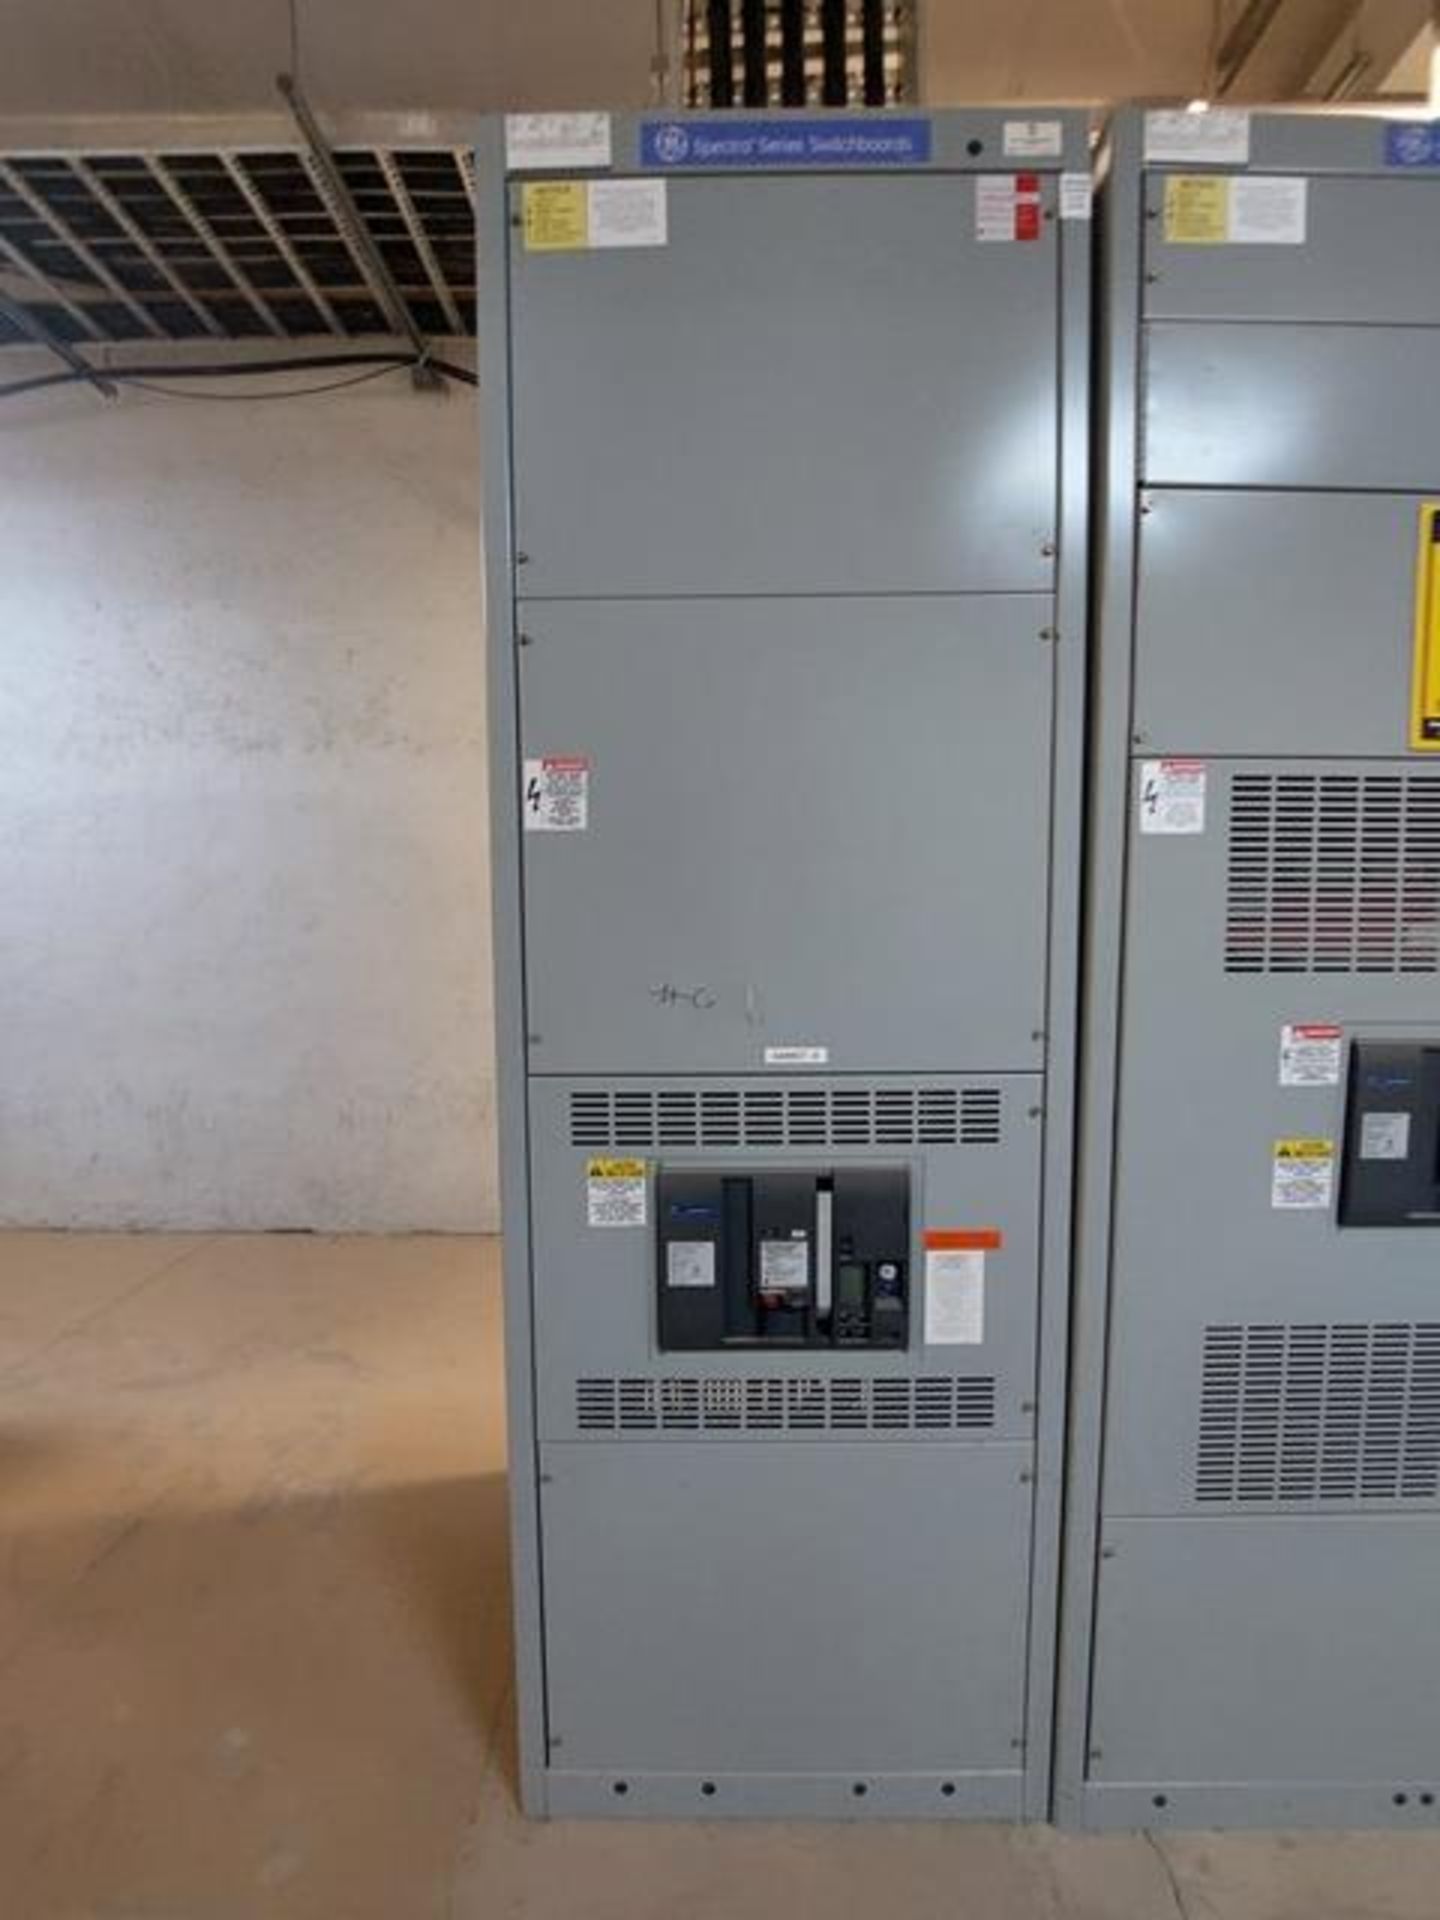 4 Sections 3000 A/1600 A General Electric Spectra Series Switchboards, 480Y / 277V, 150 KVA; - Image 3 of 6